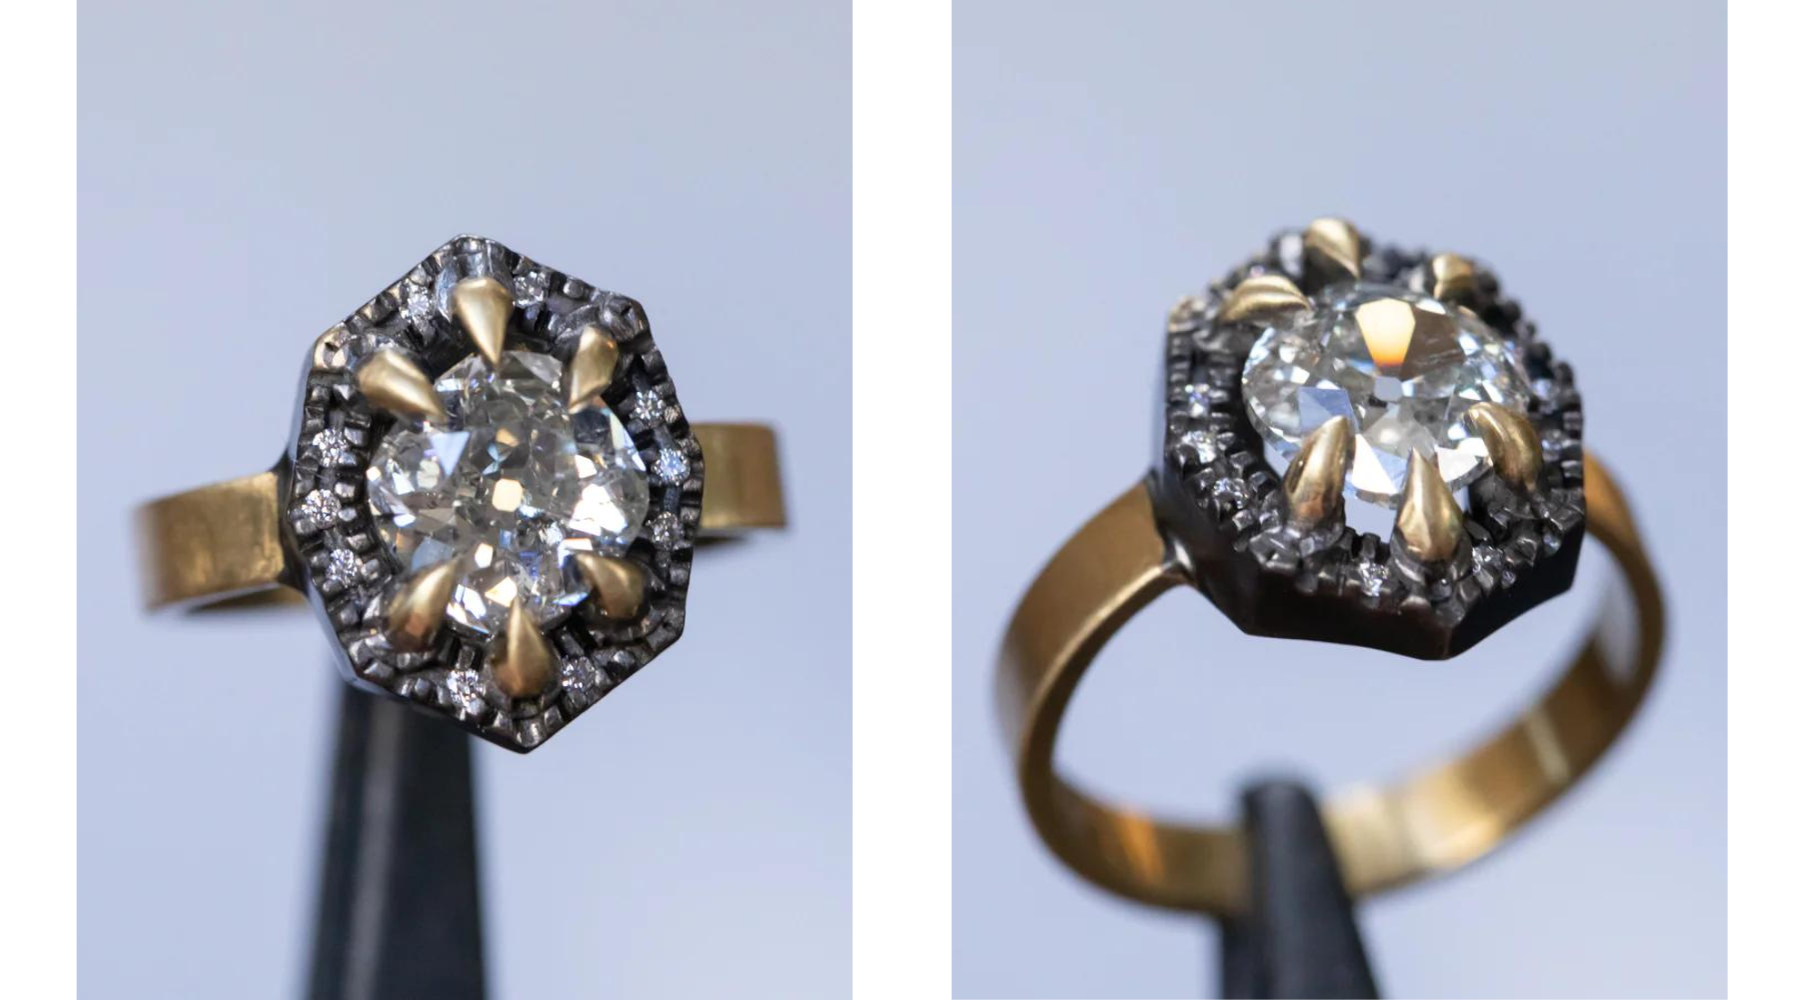 1.72CT ANTIQUE OLD MINE CUT DIAMOND AND BLACKENED HALO ANTIQUE STYLE RING IN 18K YELLOW GOLD